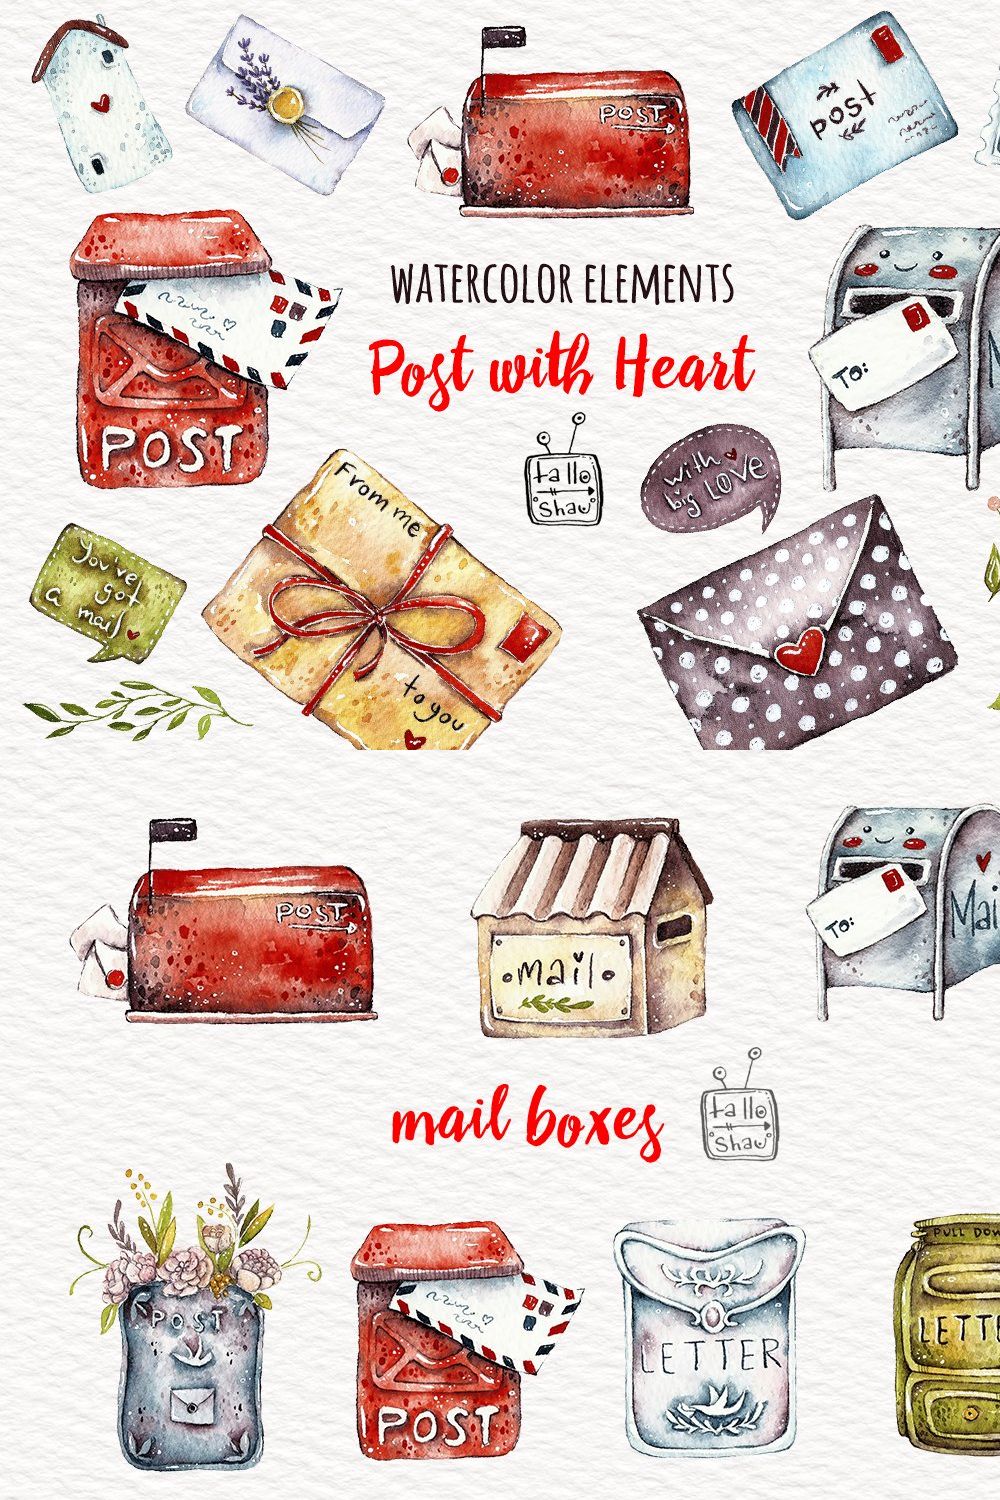 Watercolor post with heart pinterest preview image.